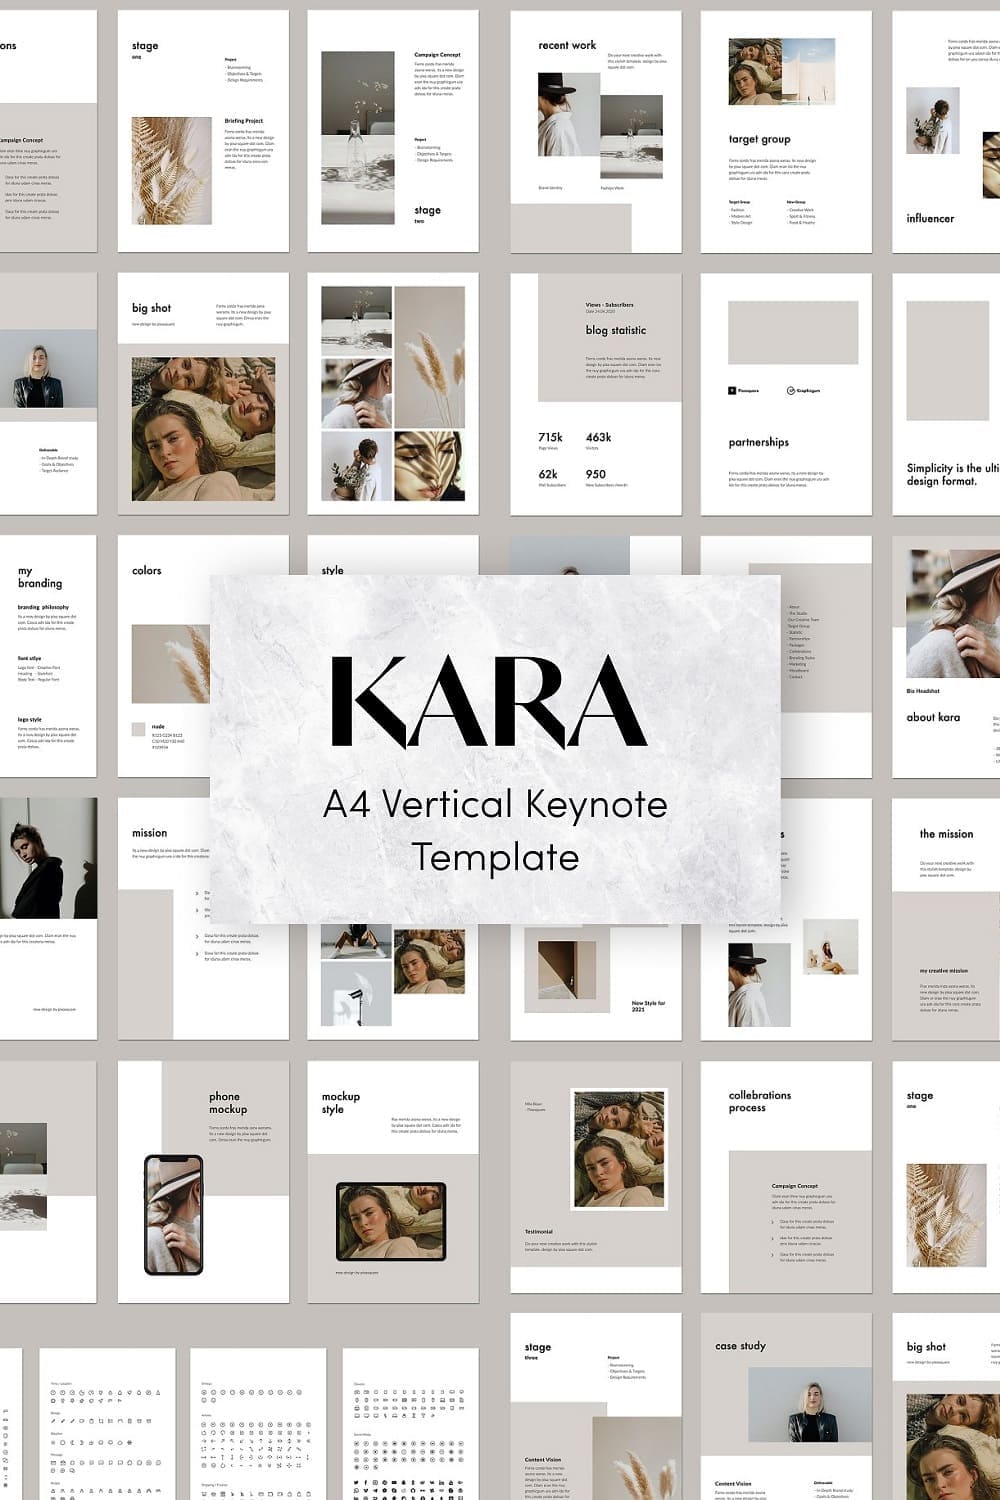 36 slides in six rows and a logo in the center, Kara A4 vertical keynote template.